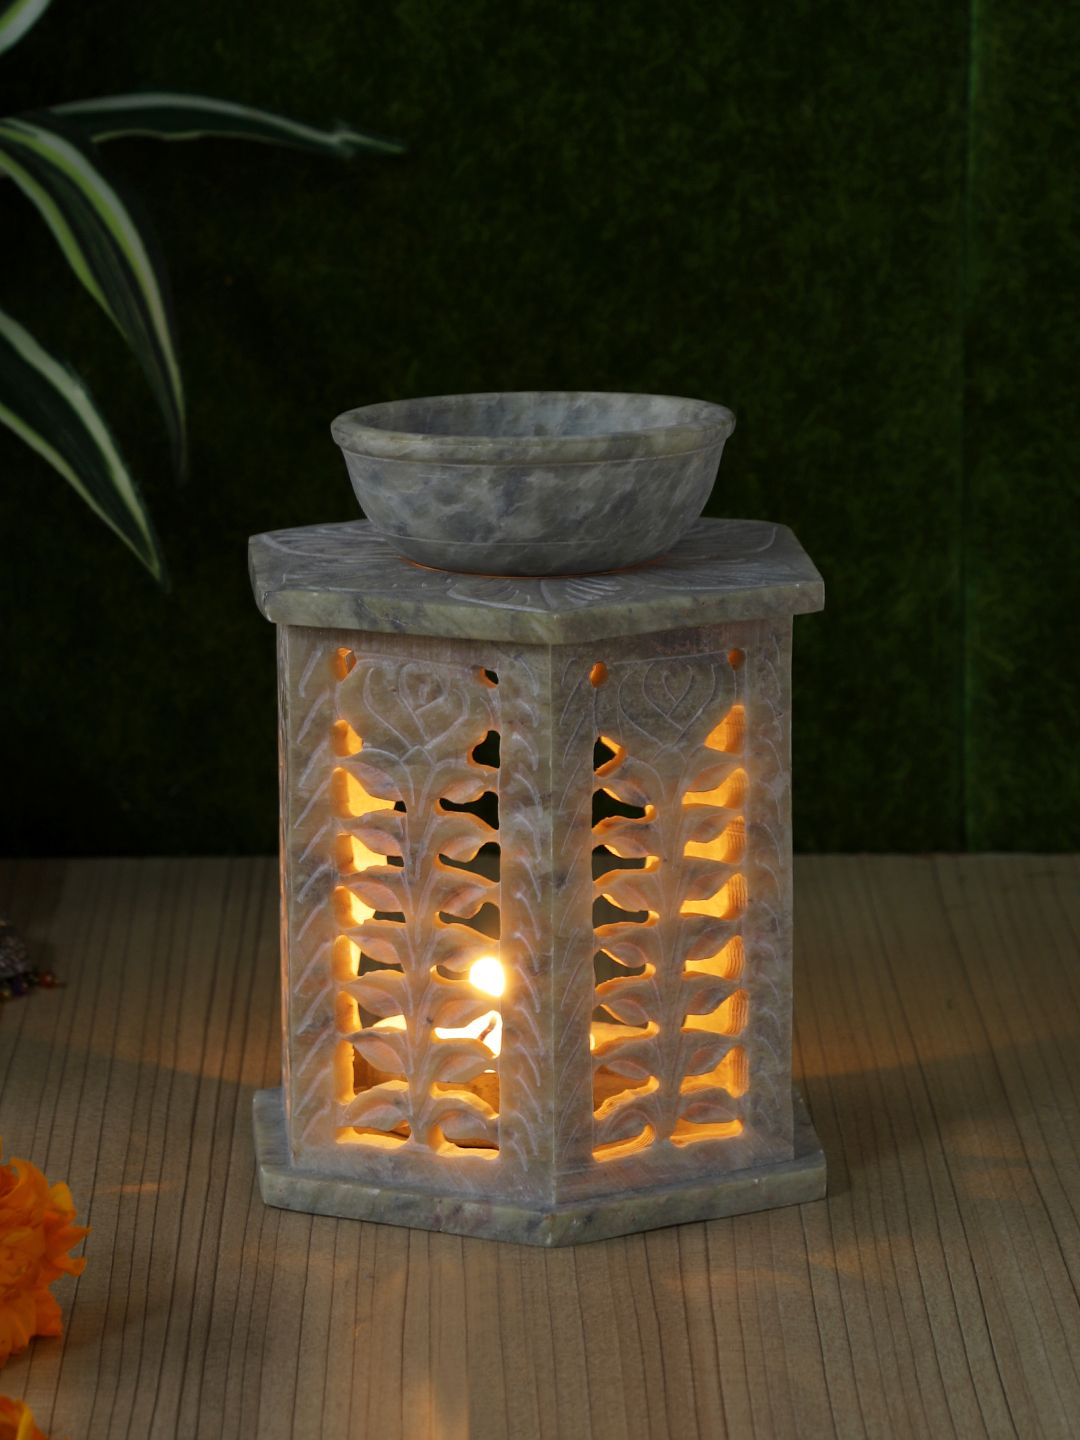 Aapno Rajasthan White Aroma Oil Diffuser Price in India